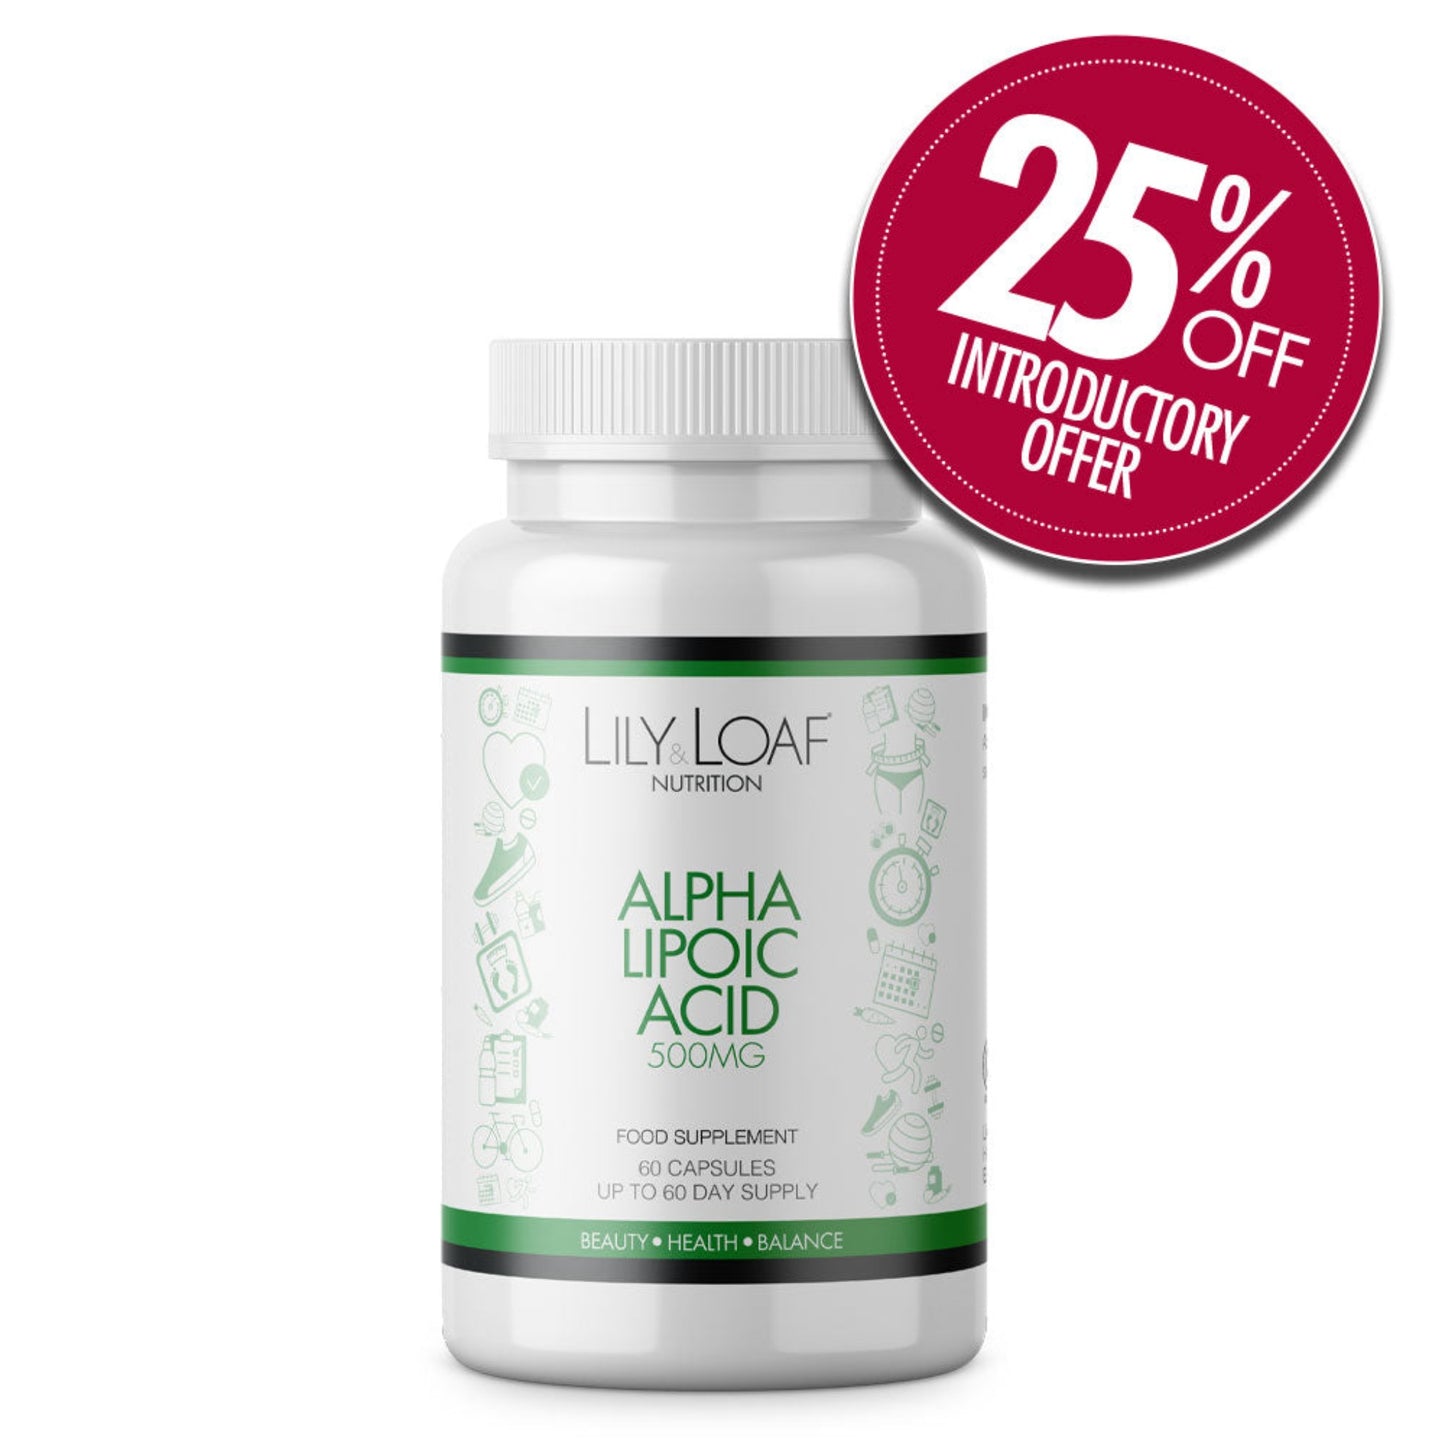 Lily & Loaf Alpha Lipoic Acid with 25% off introductory offer sticker